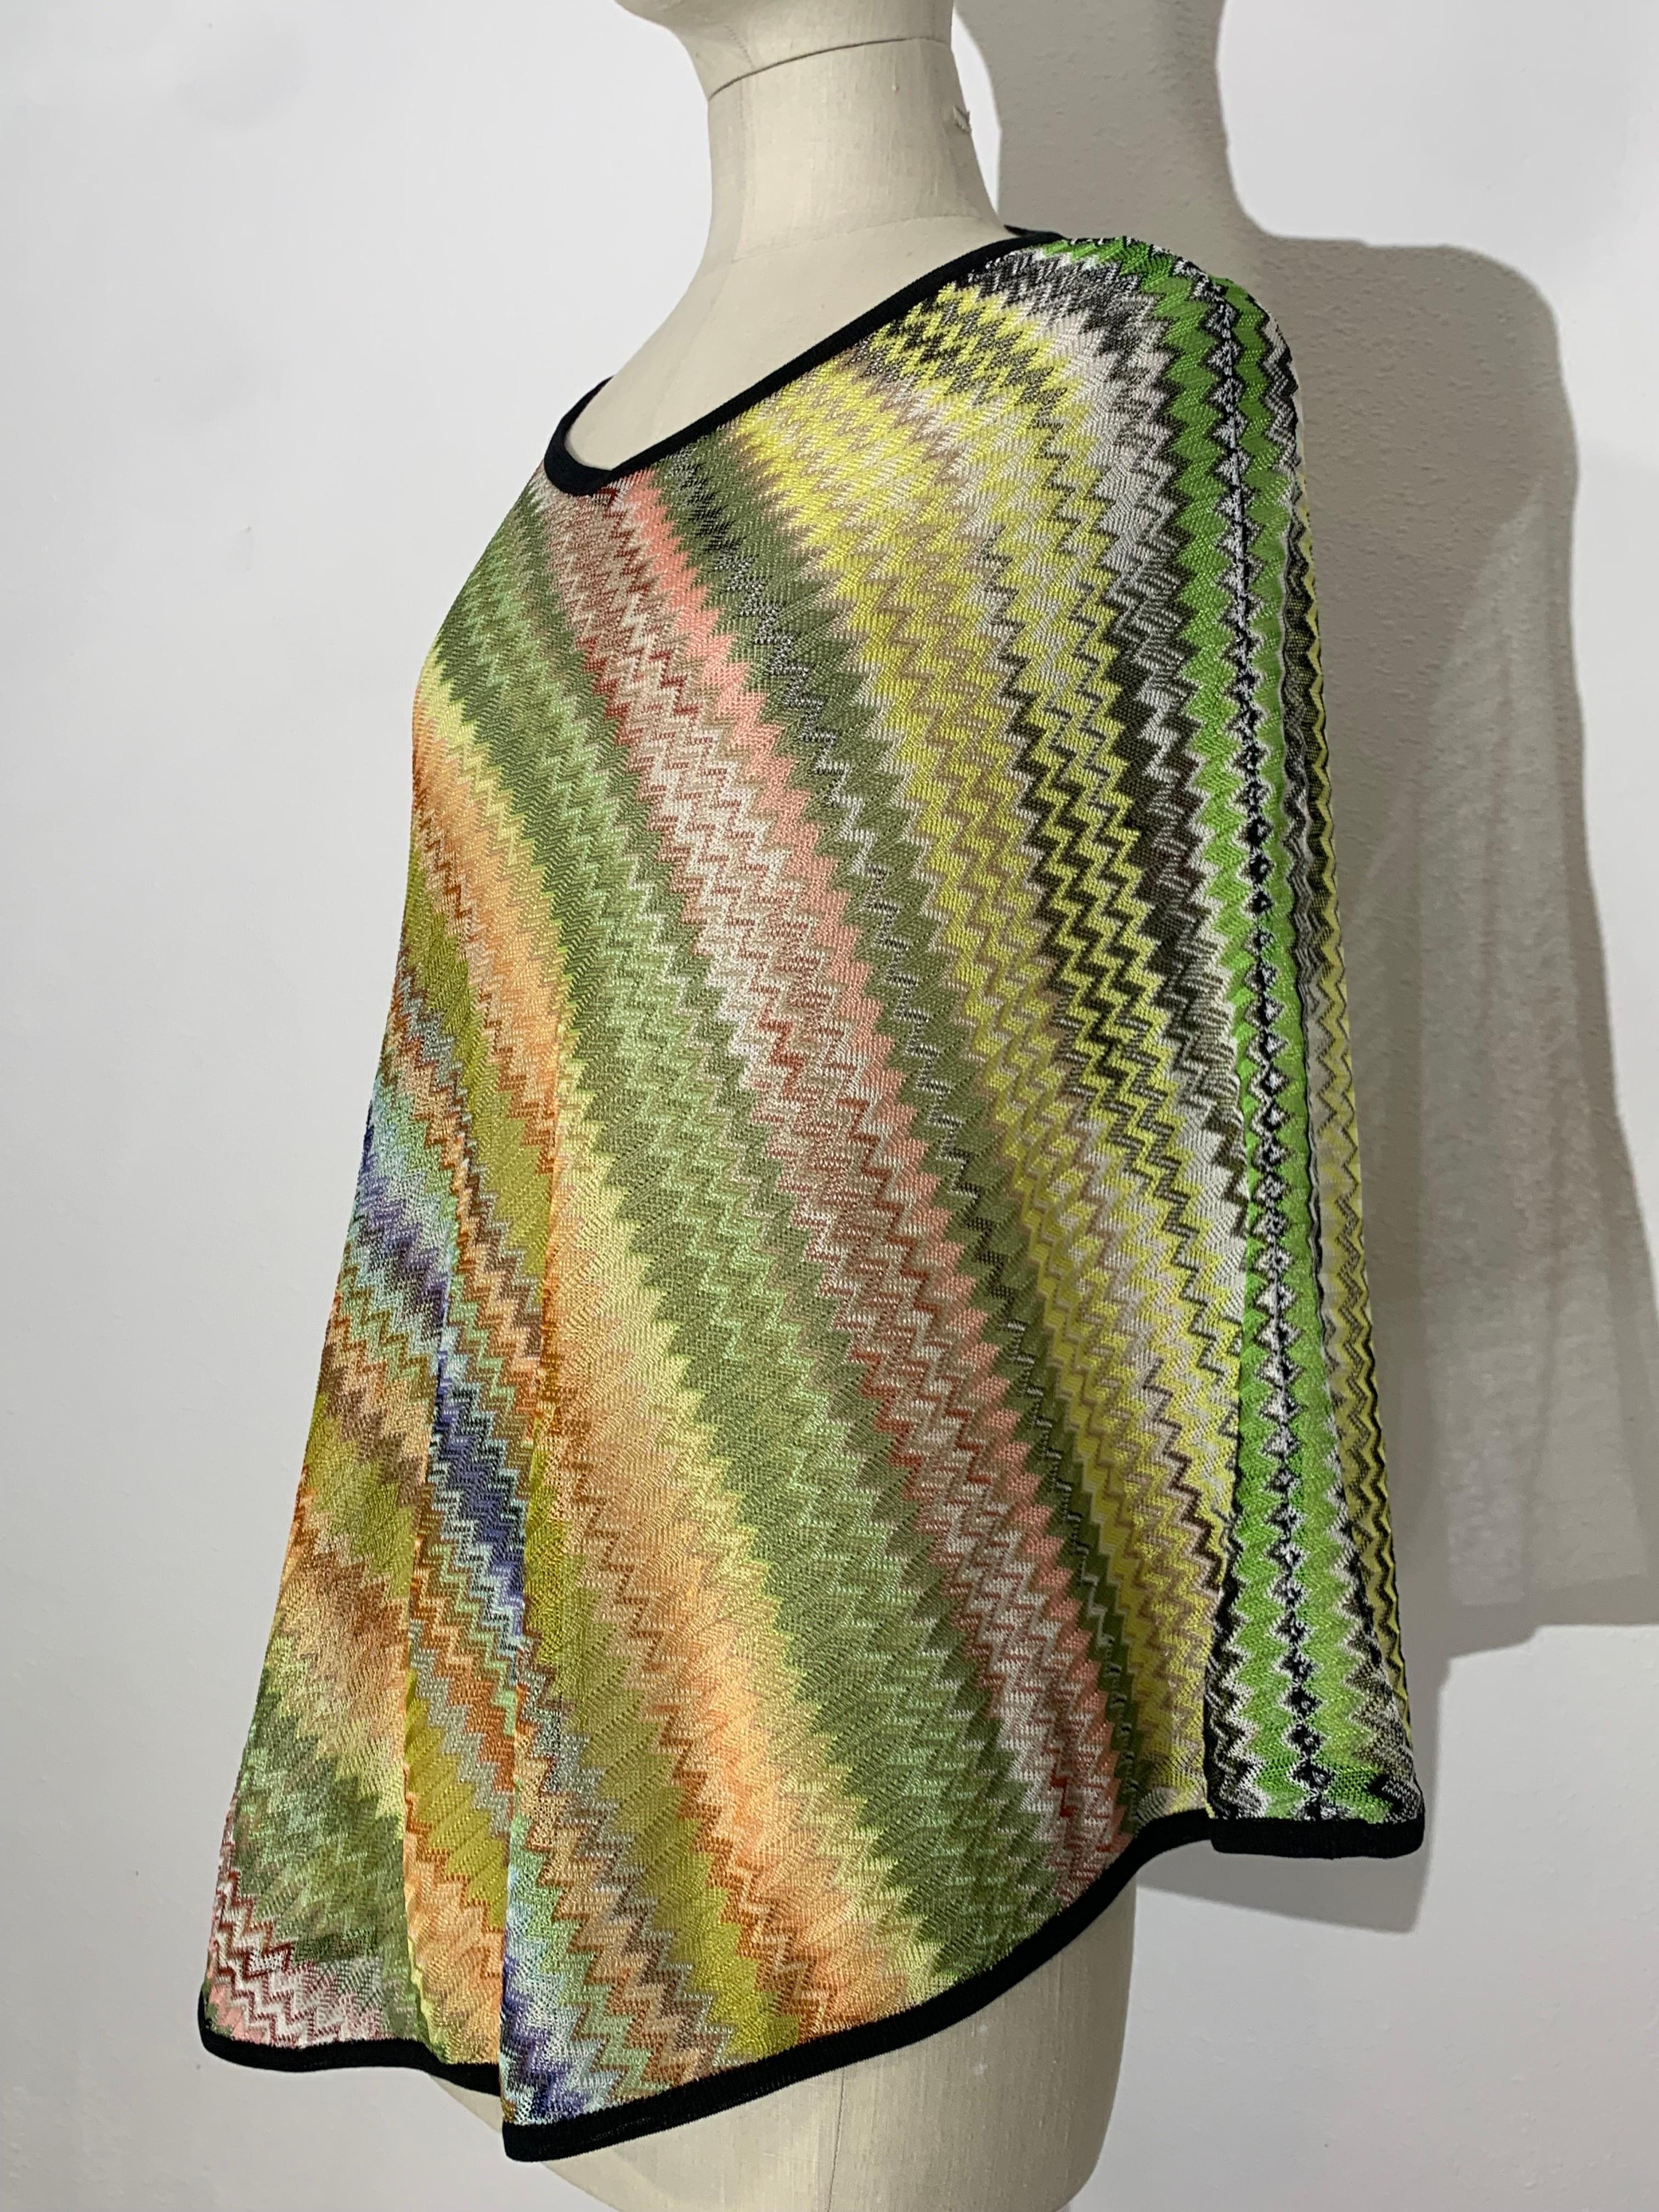 Missoni Spring/Summer Rayon & Cotton Knit Cover-Up in Classic Missoni Zig-Zag For Sale 3